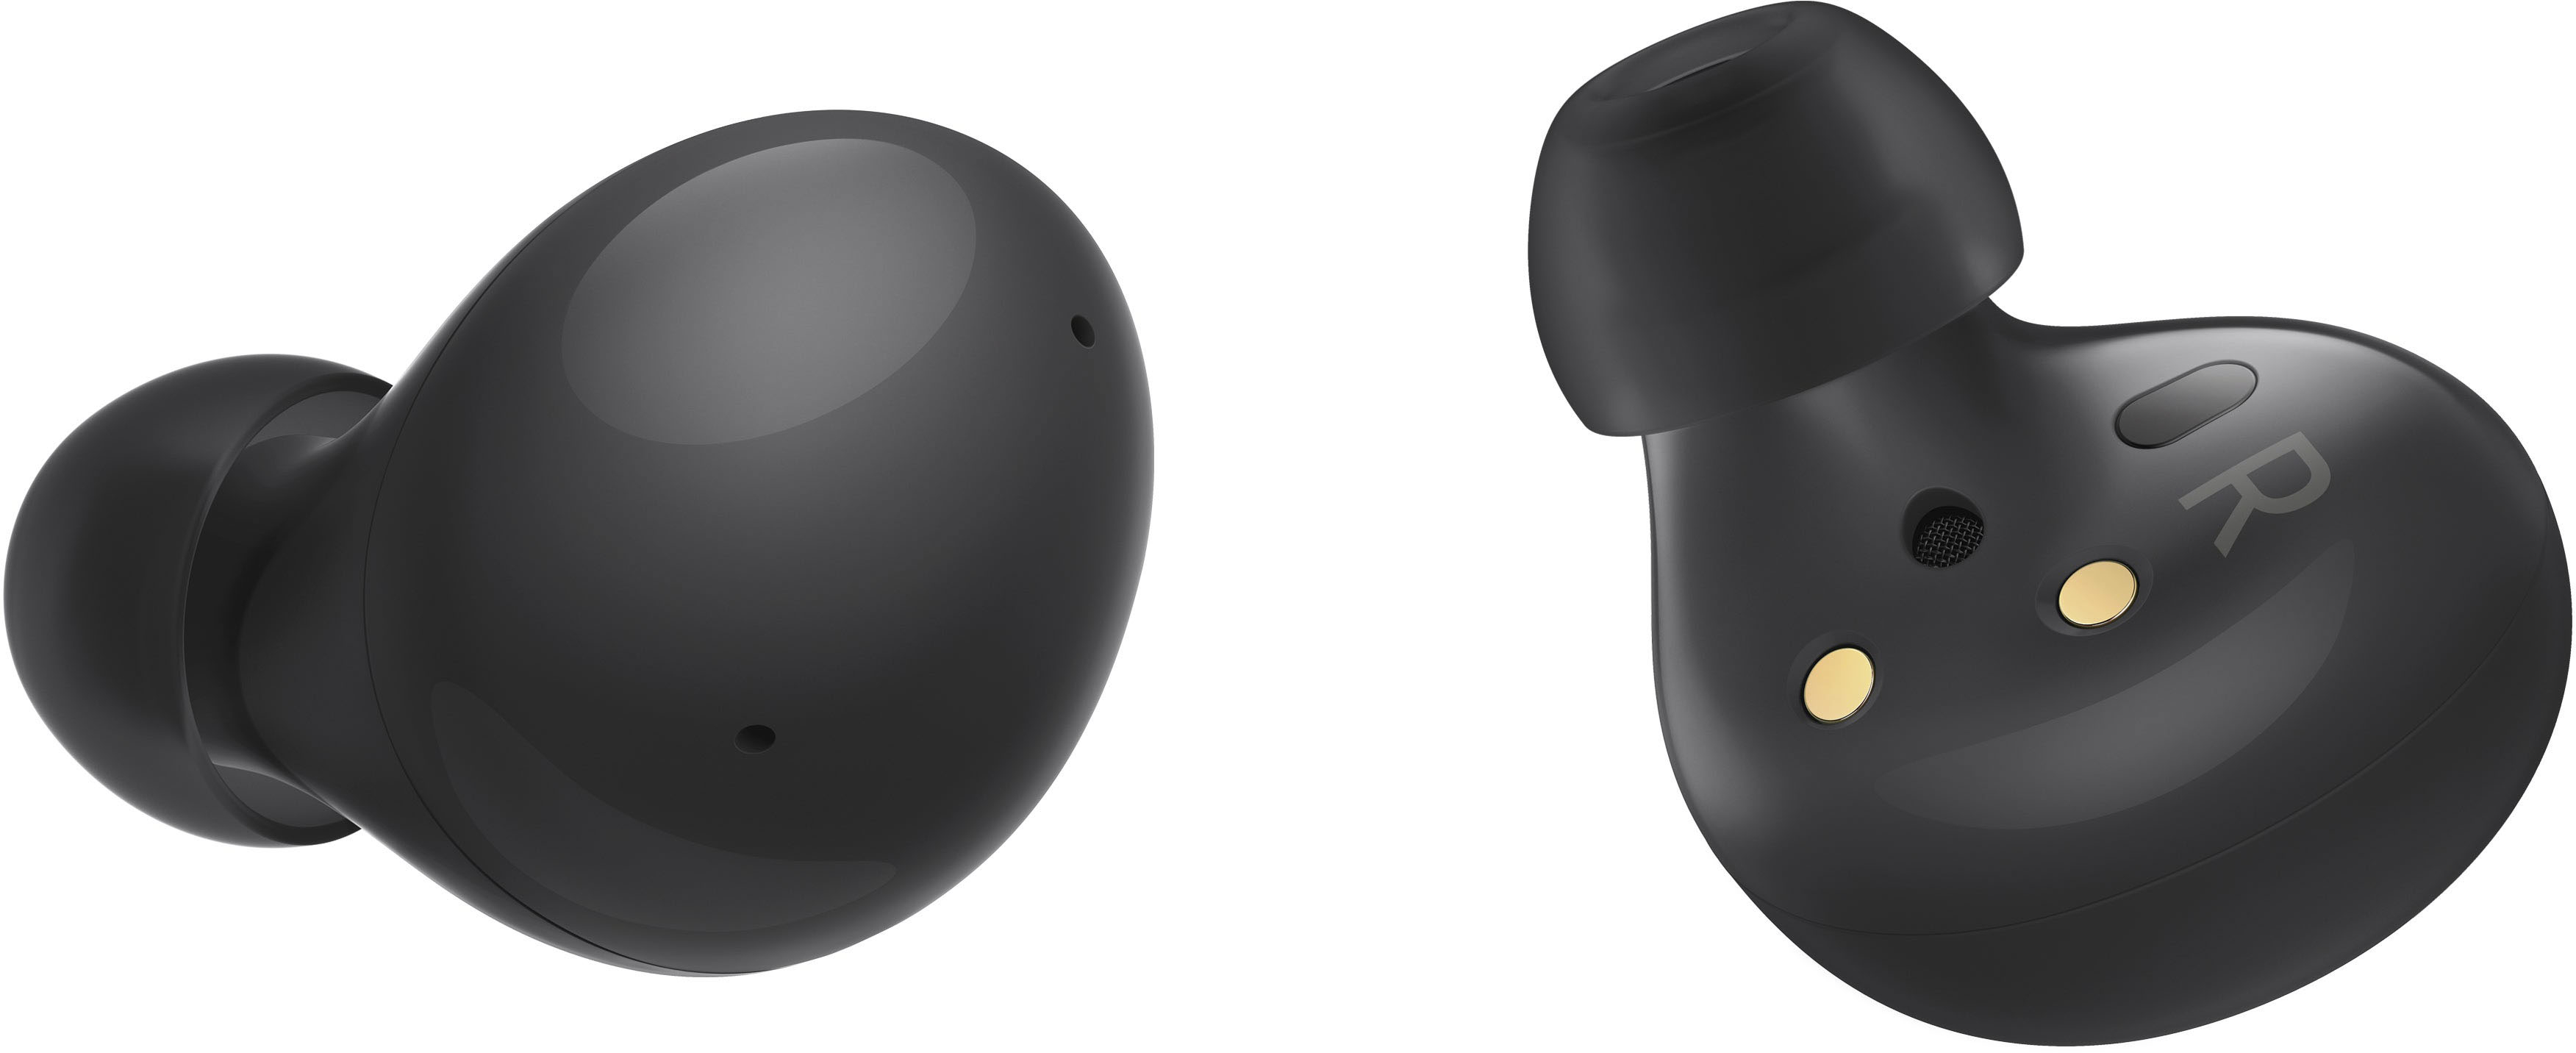 Samsung Galaxy Buds Pro for Sale  Buy New, Used, & Certified Refurbished  from